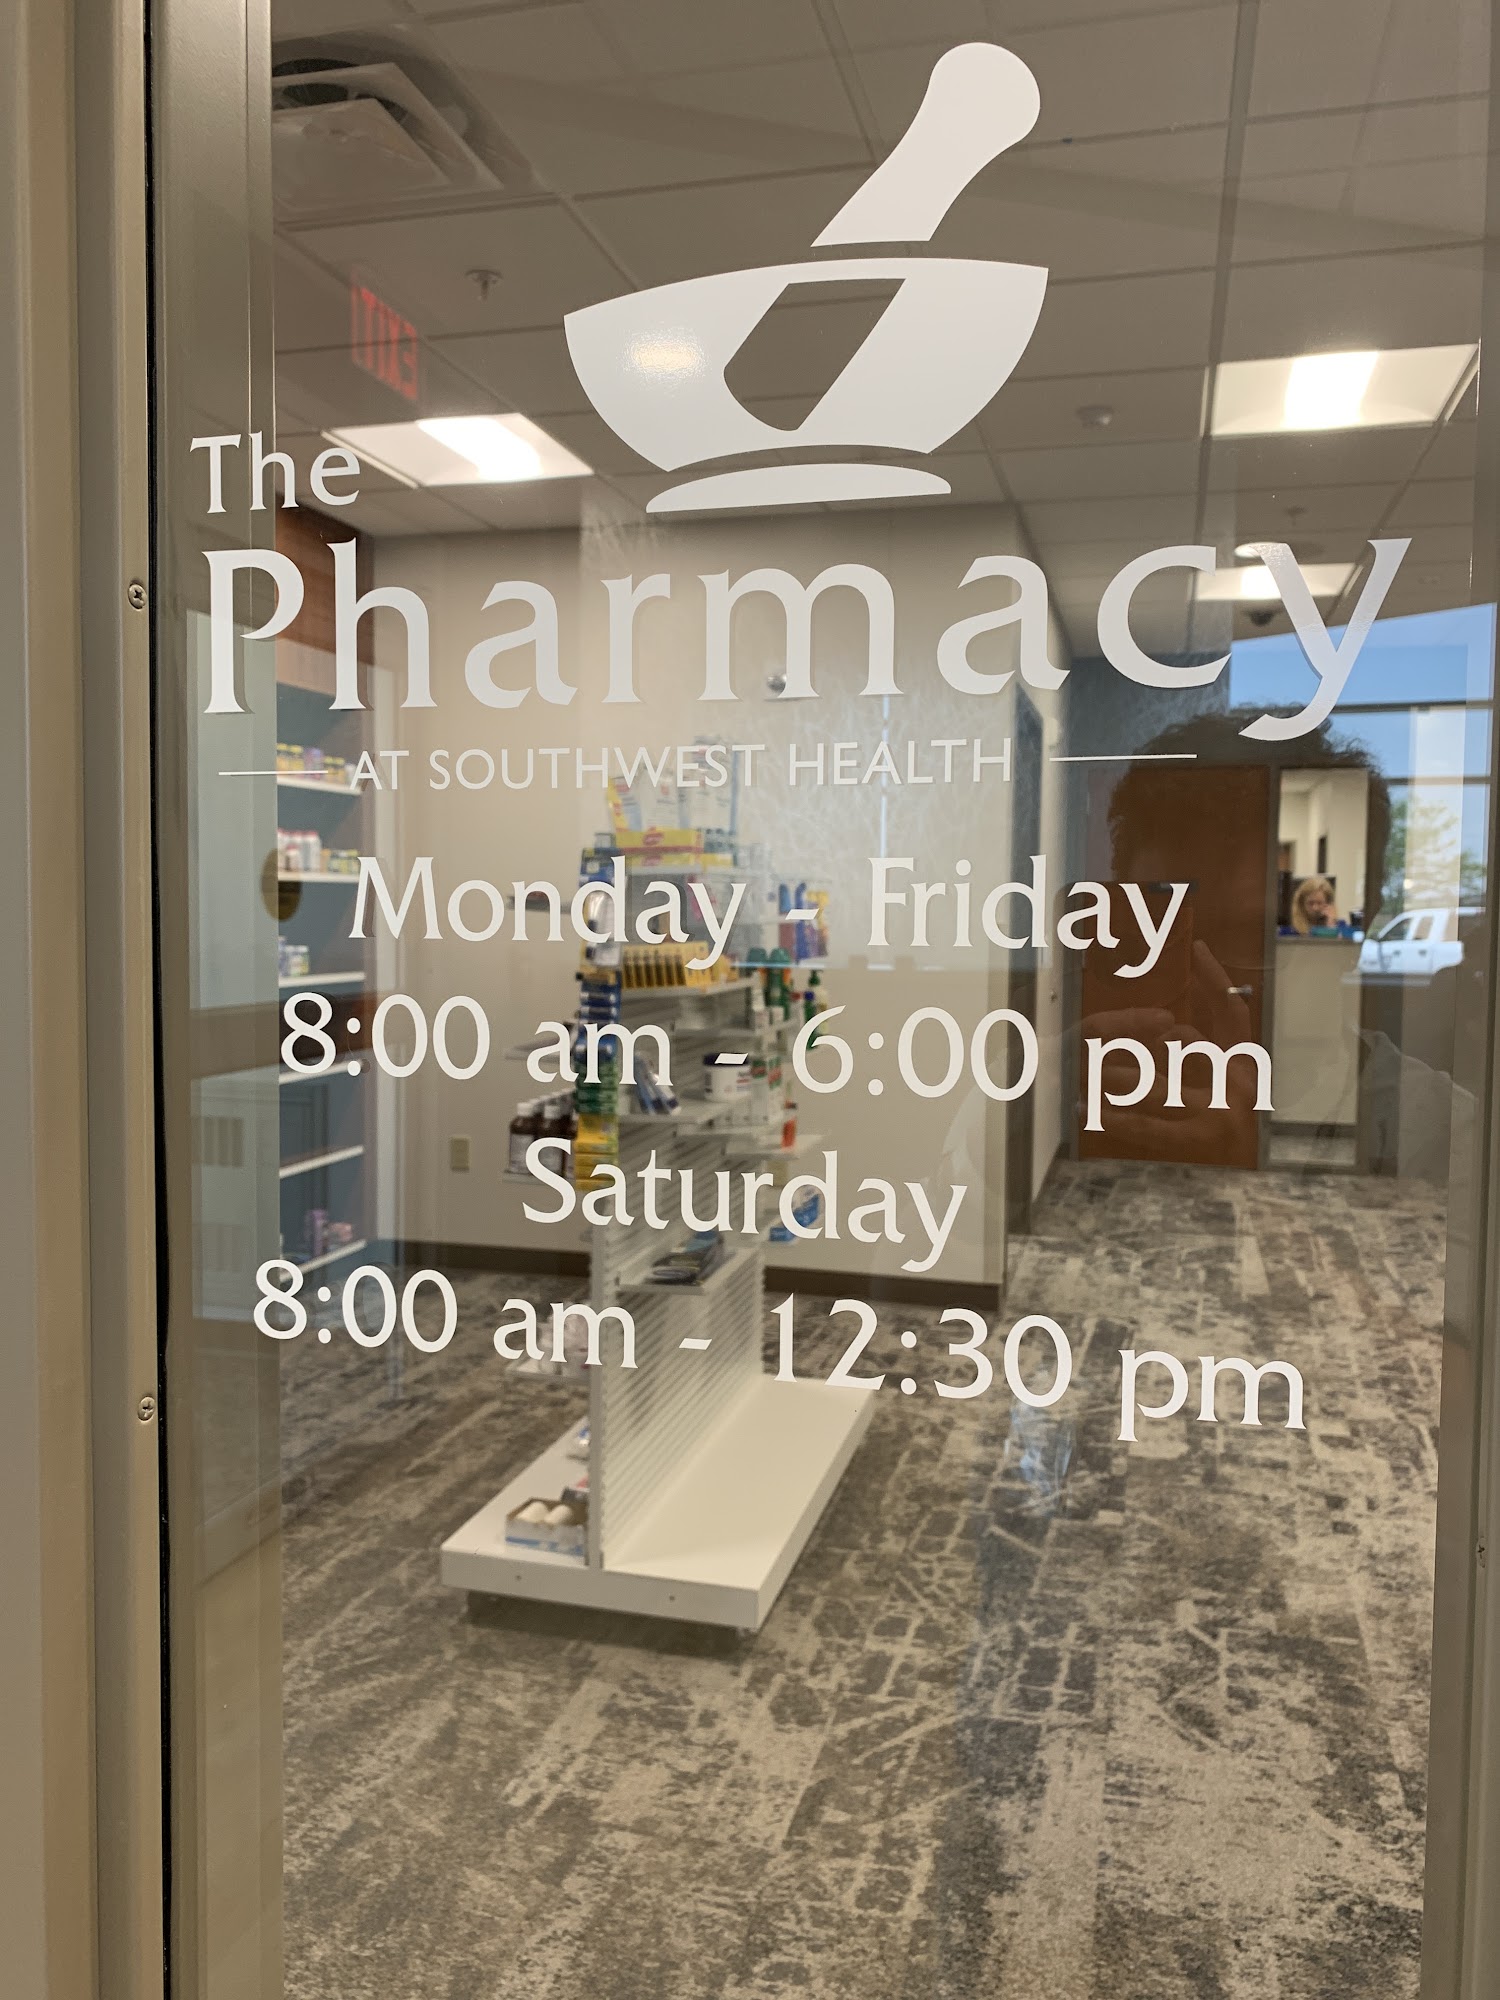 The Pharmacy at Southwest Health